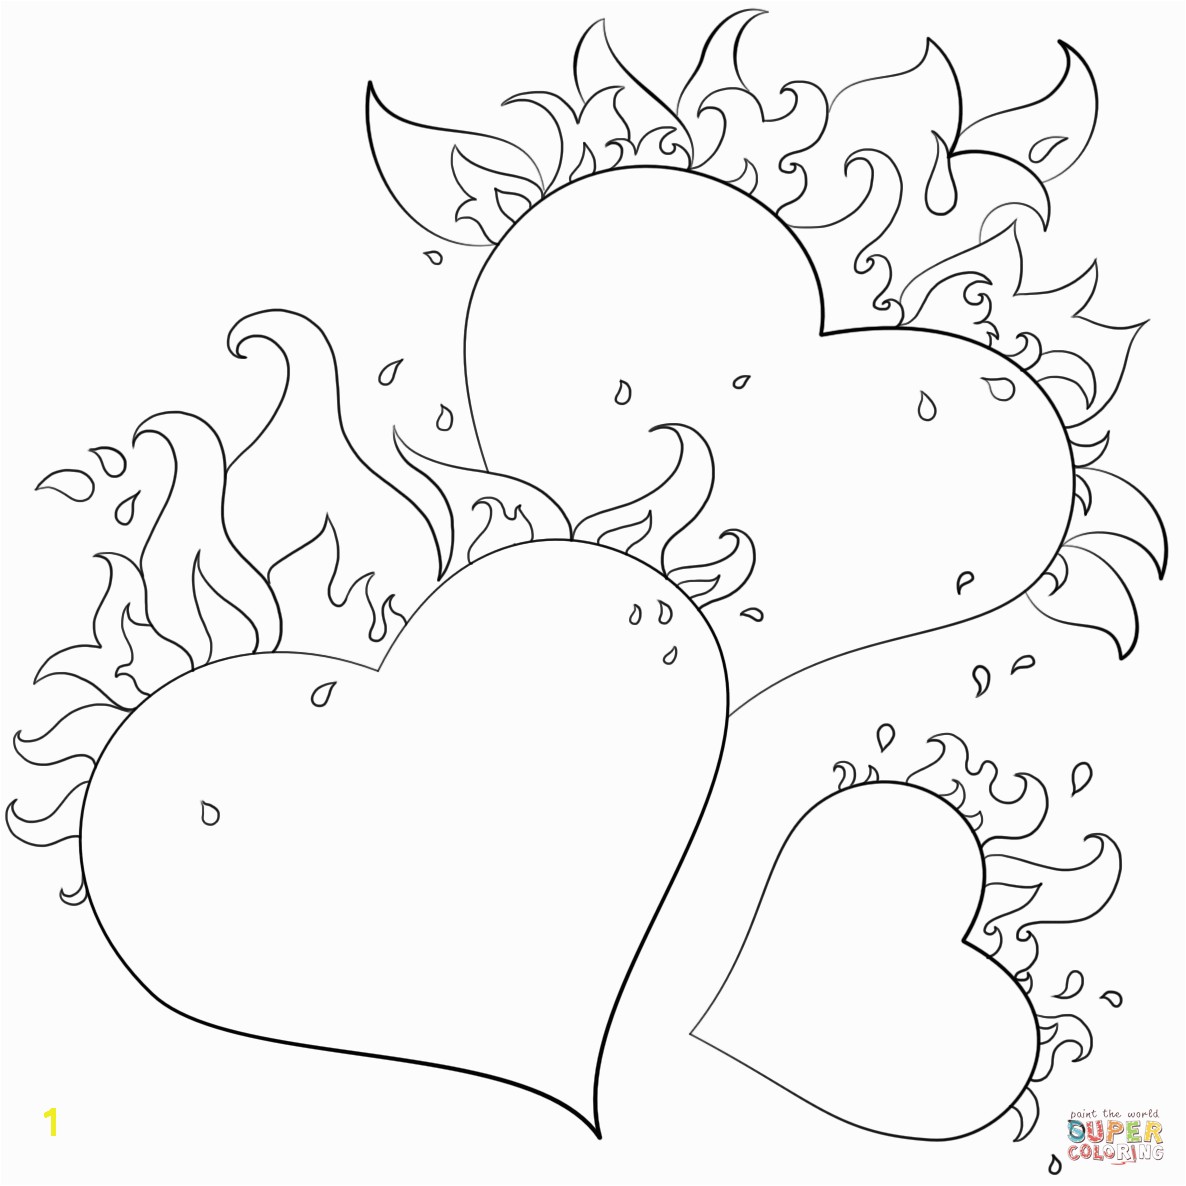 Calgary Flames Coloring Pages Hearts with Flames Coloring Page with Flame Coloring Page Free